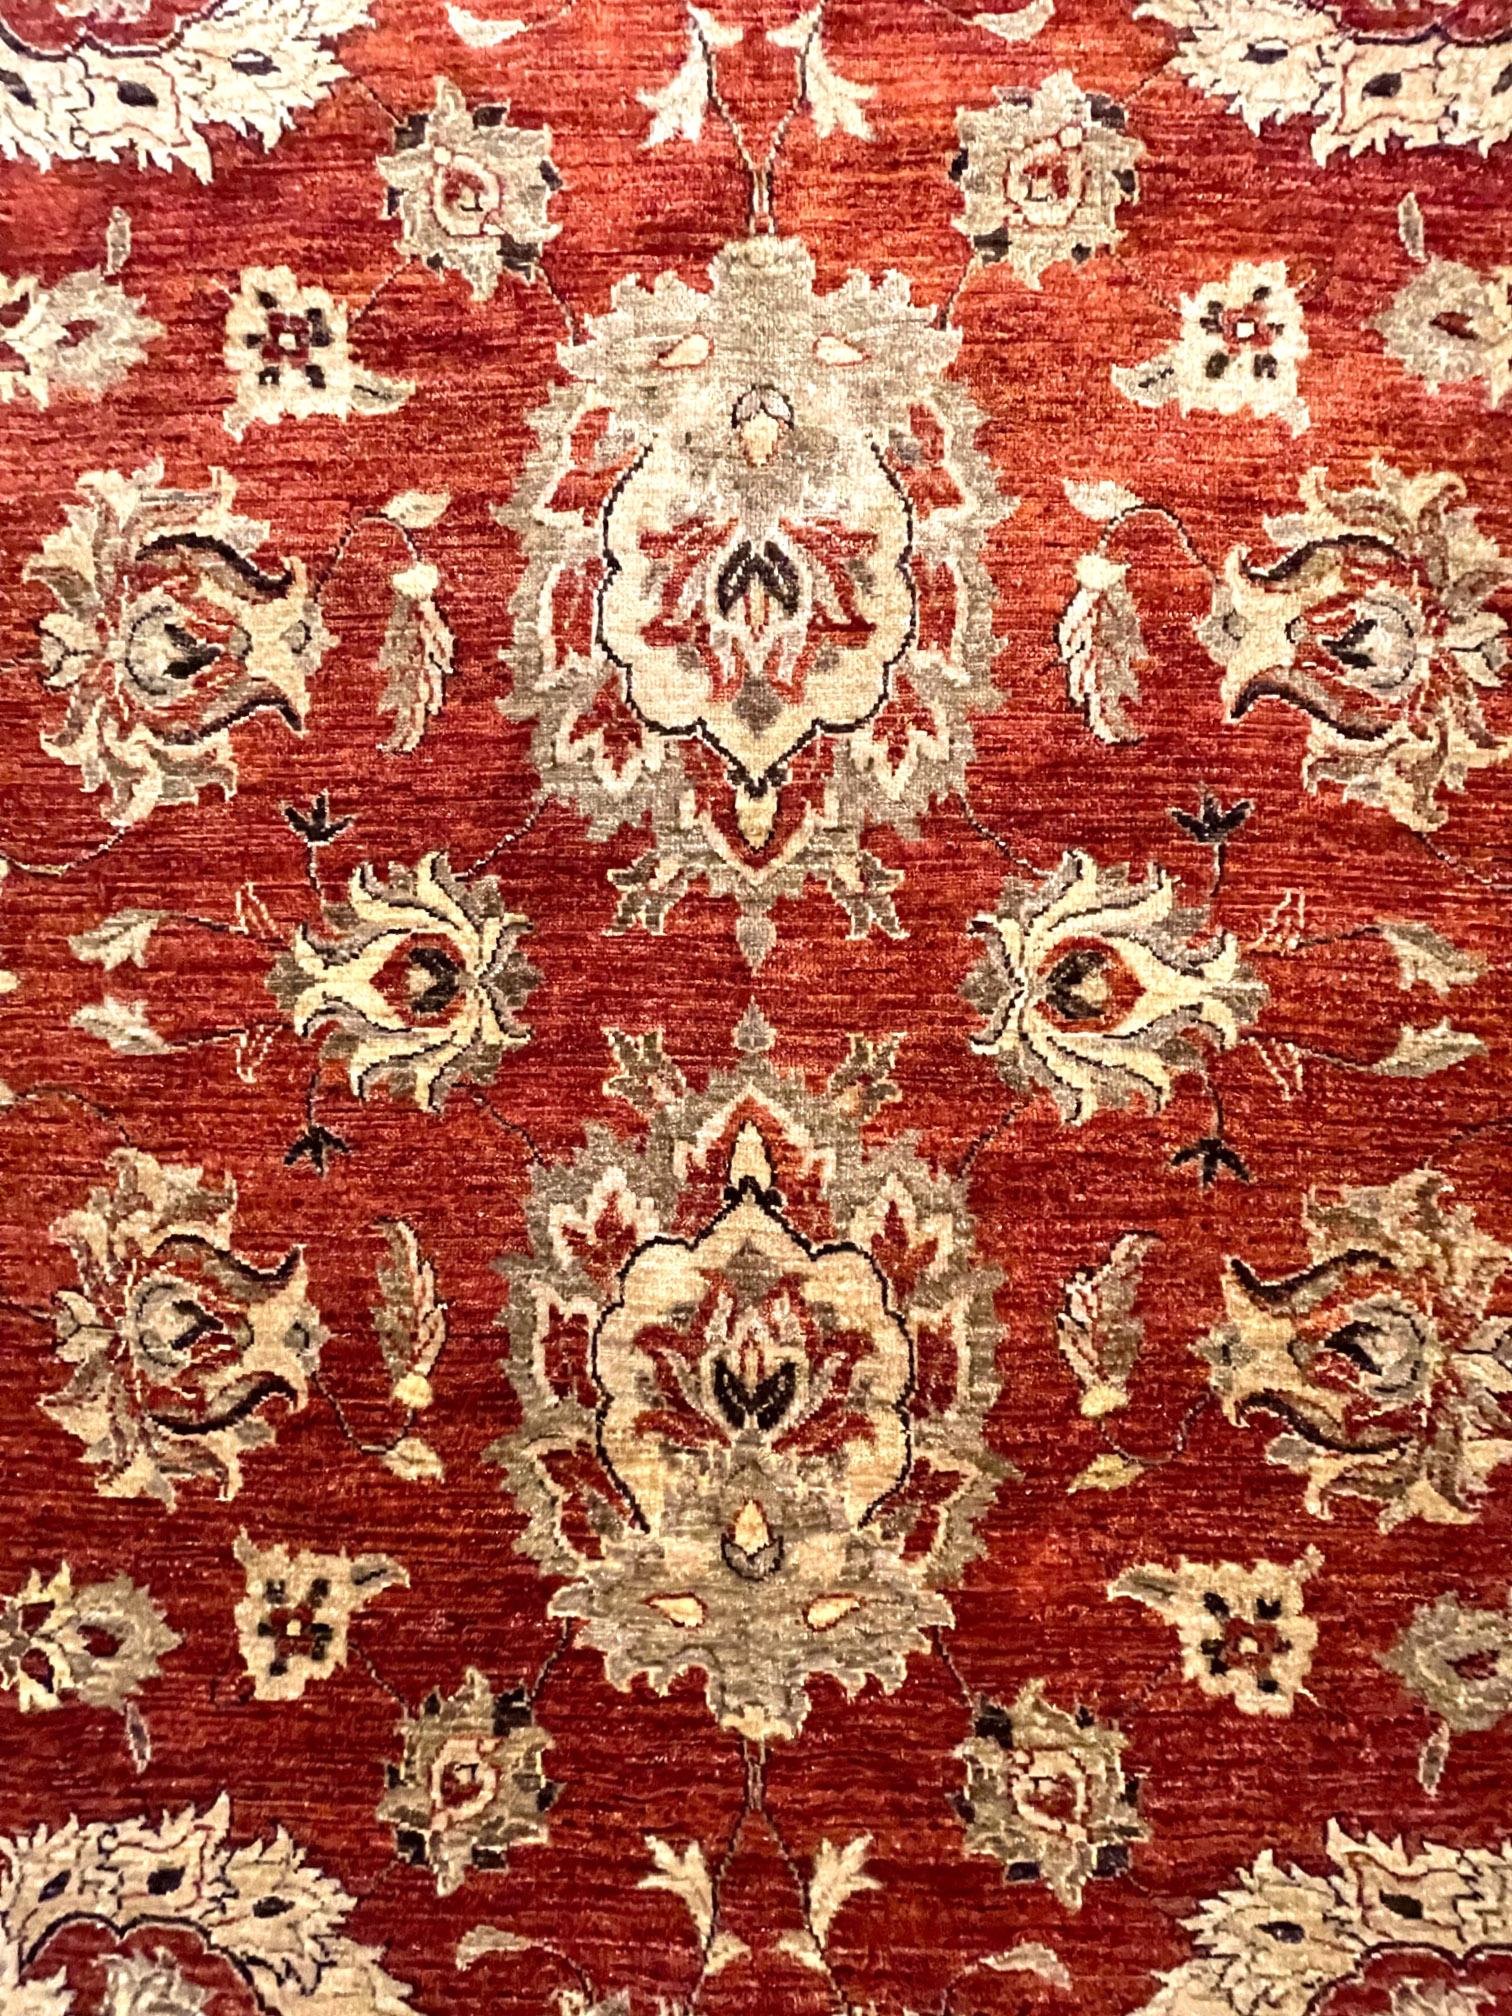 This floral all-over rug is made in Pakistan, it has wool pile and cotton foundation. The base color is rust with brown border. The design is all over semi floral pattern. This rug is a display sample with an excellent condition. The size is this